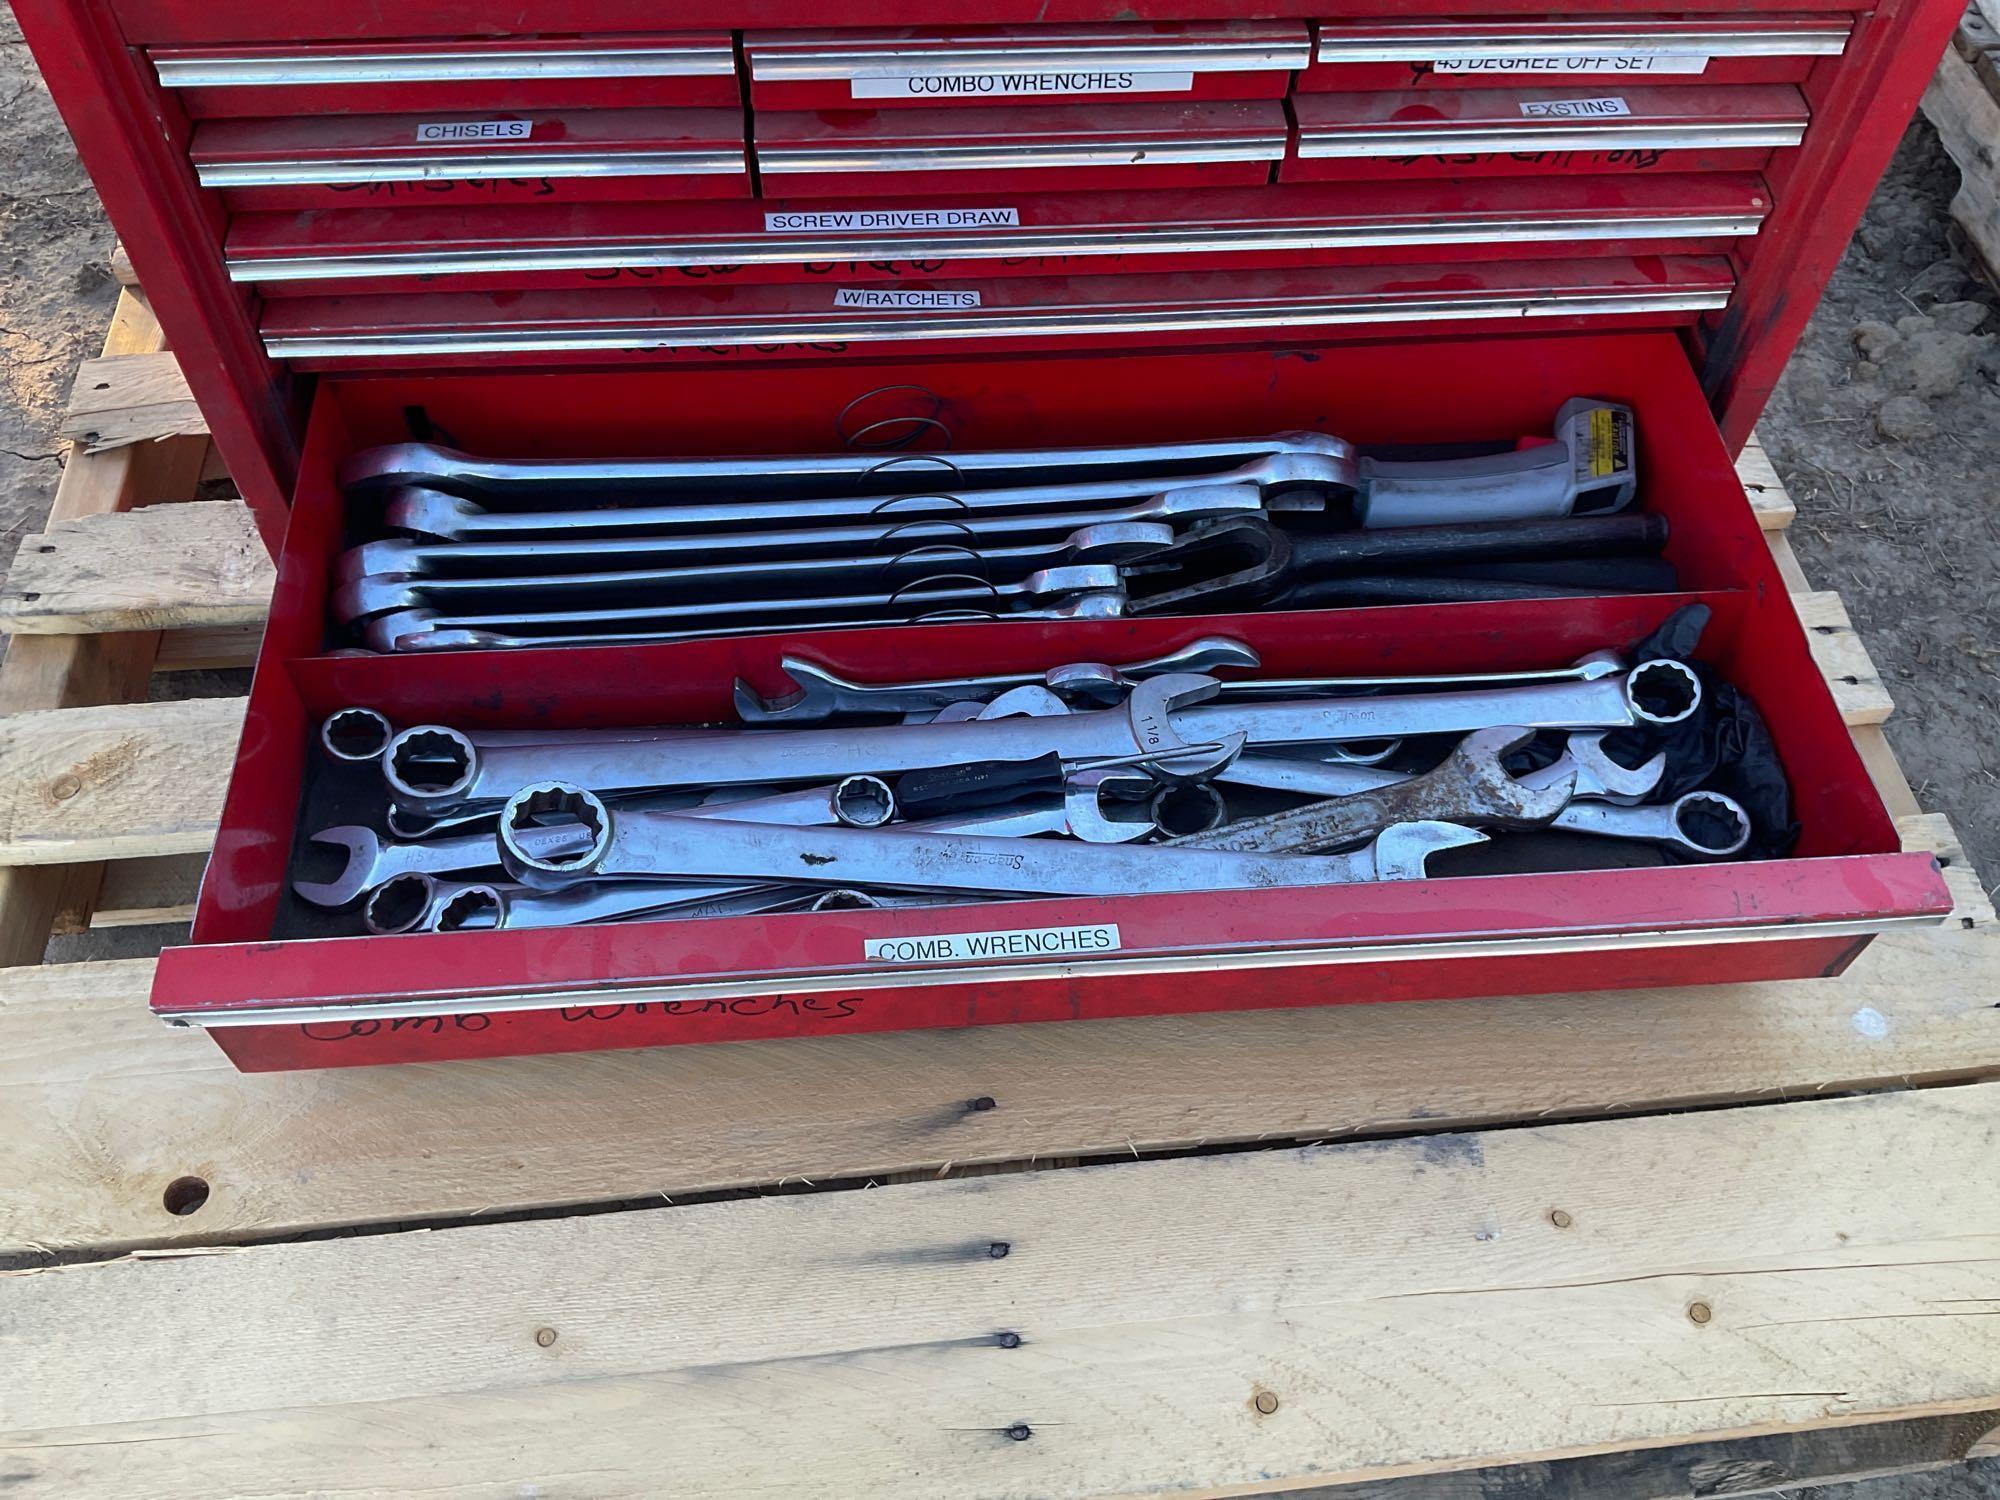 Snap-on tool box and tools